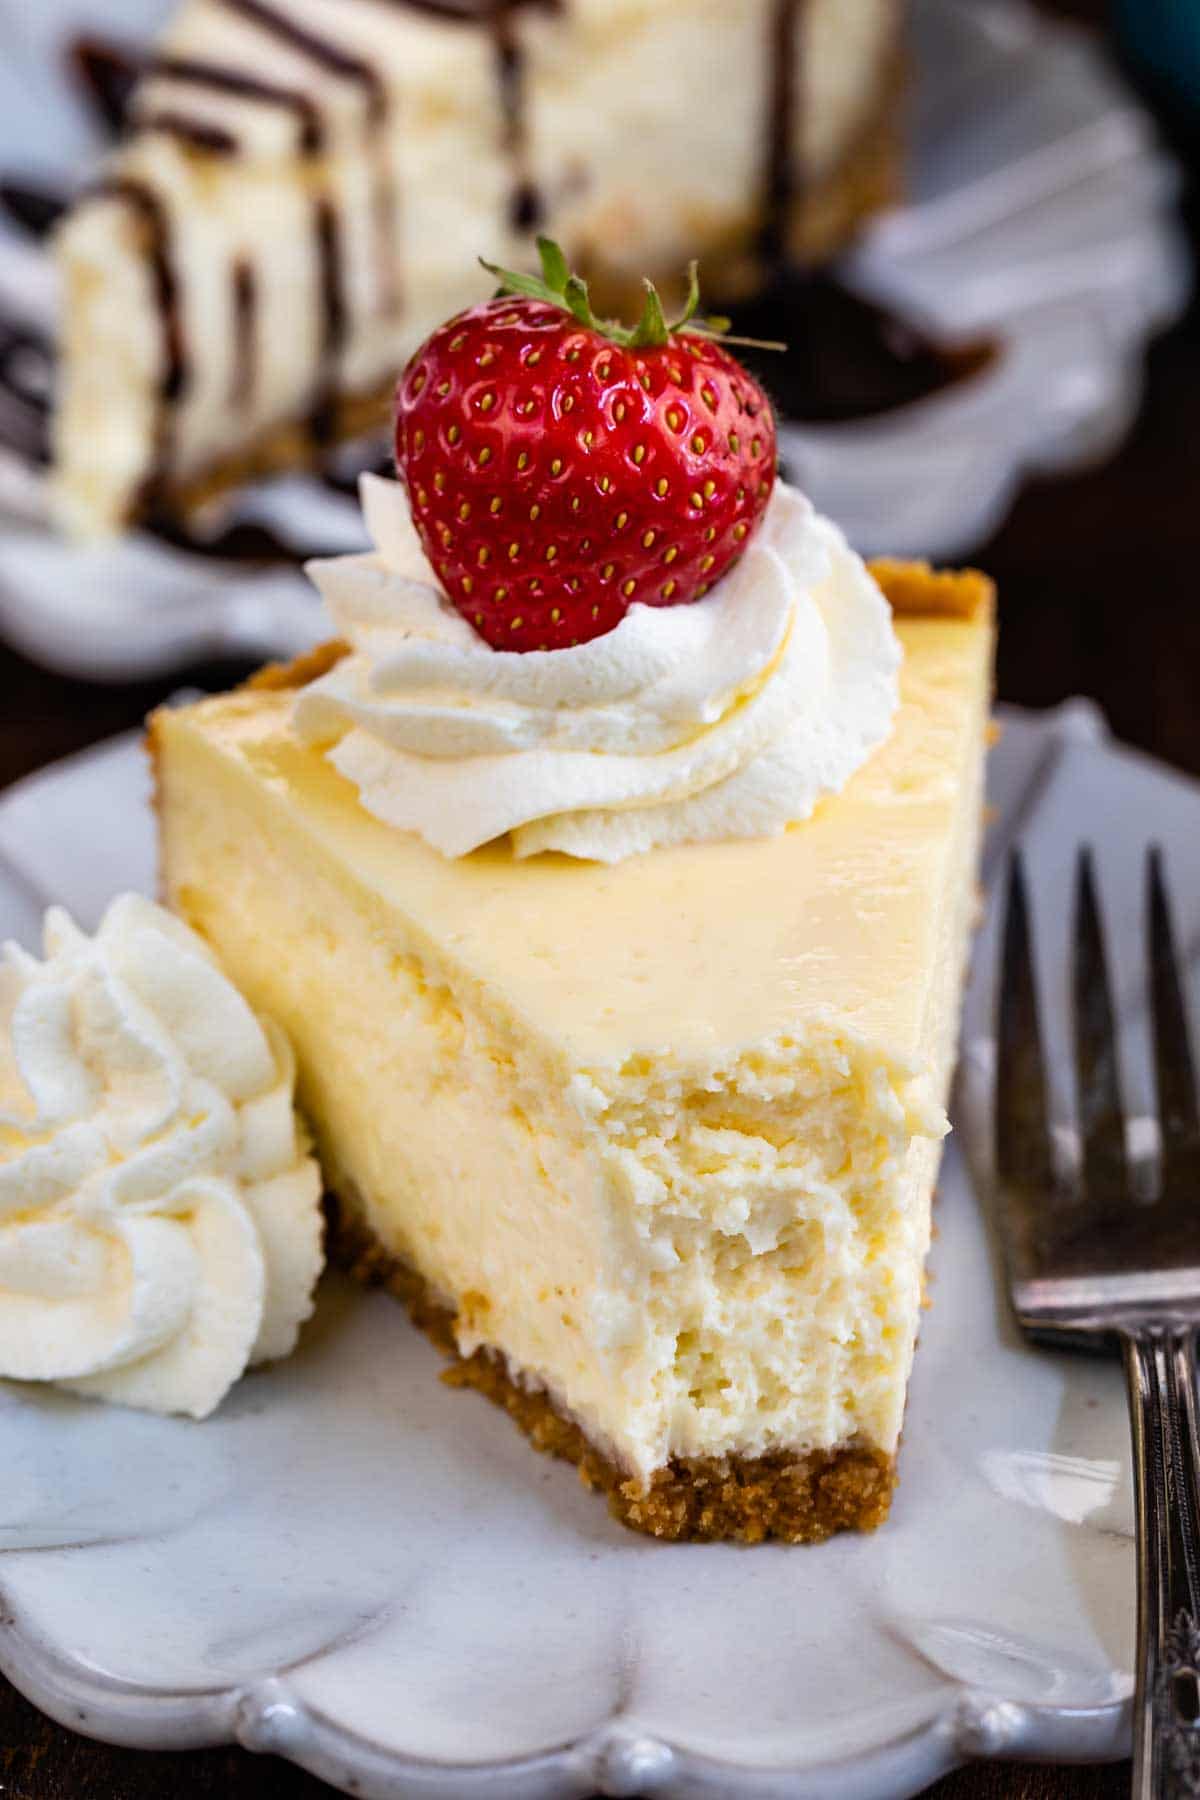 Slice of classic cheesecake with whipped cream and strawberry on top with one bite missing